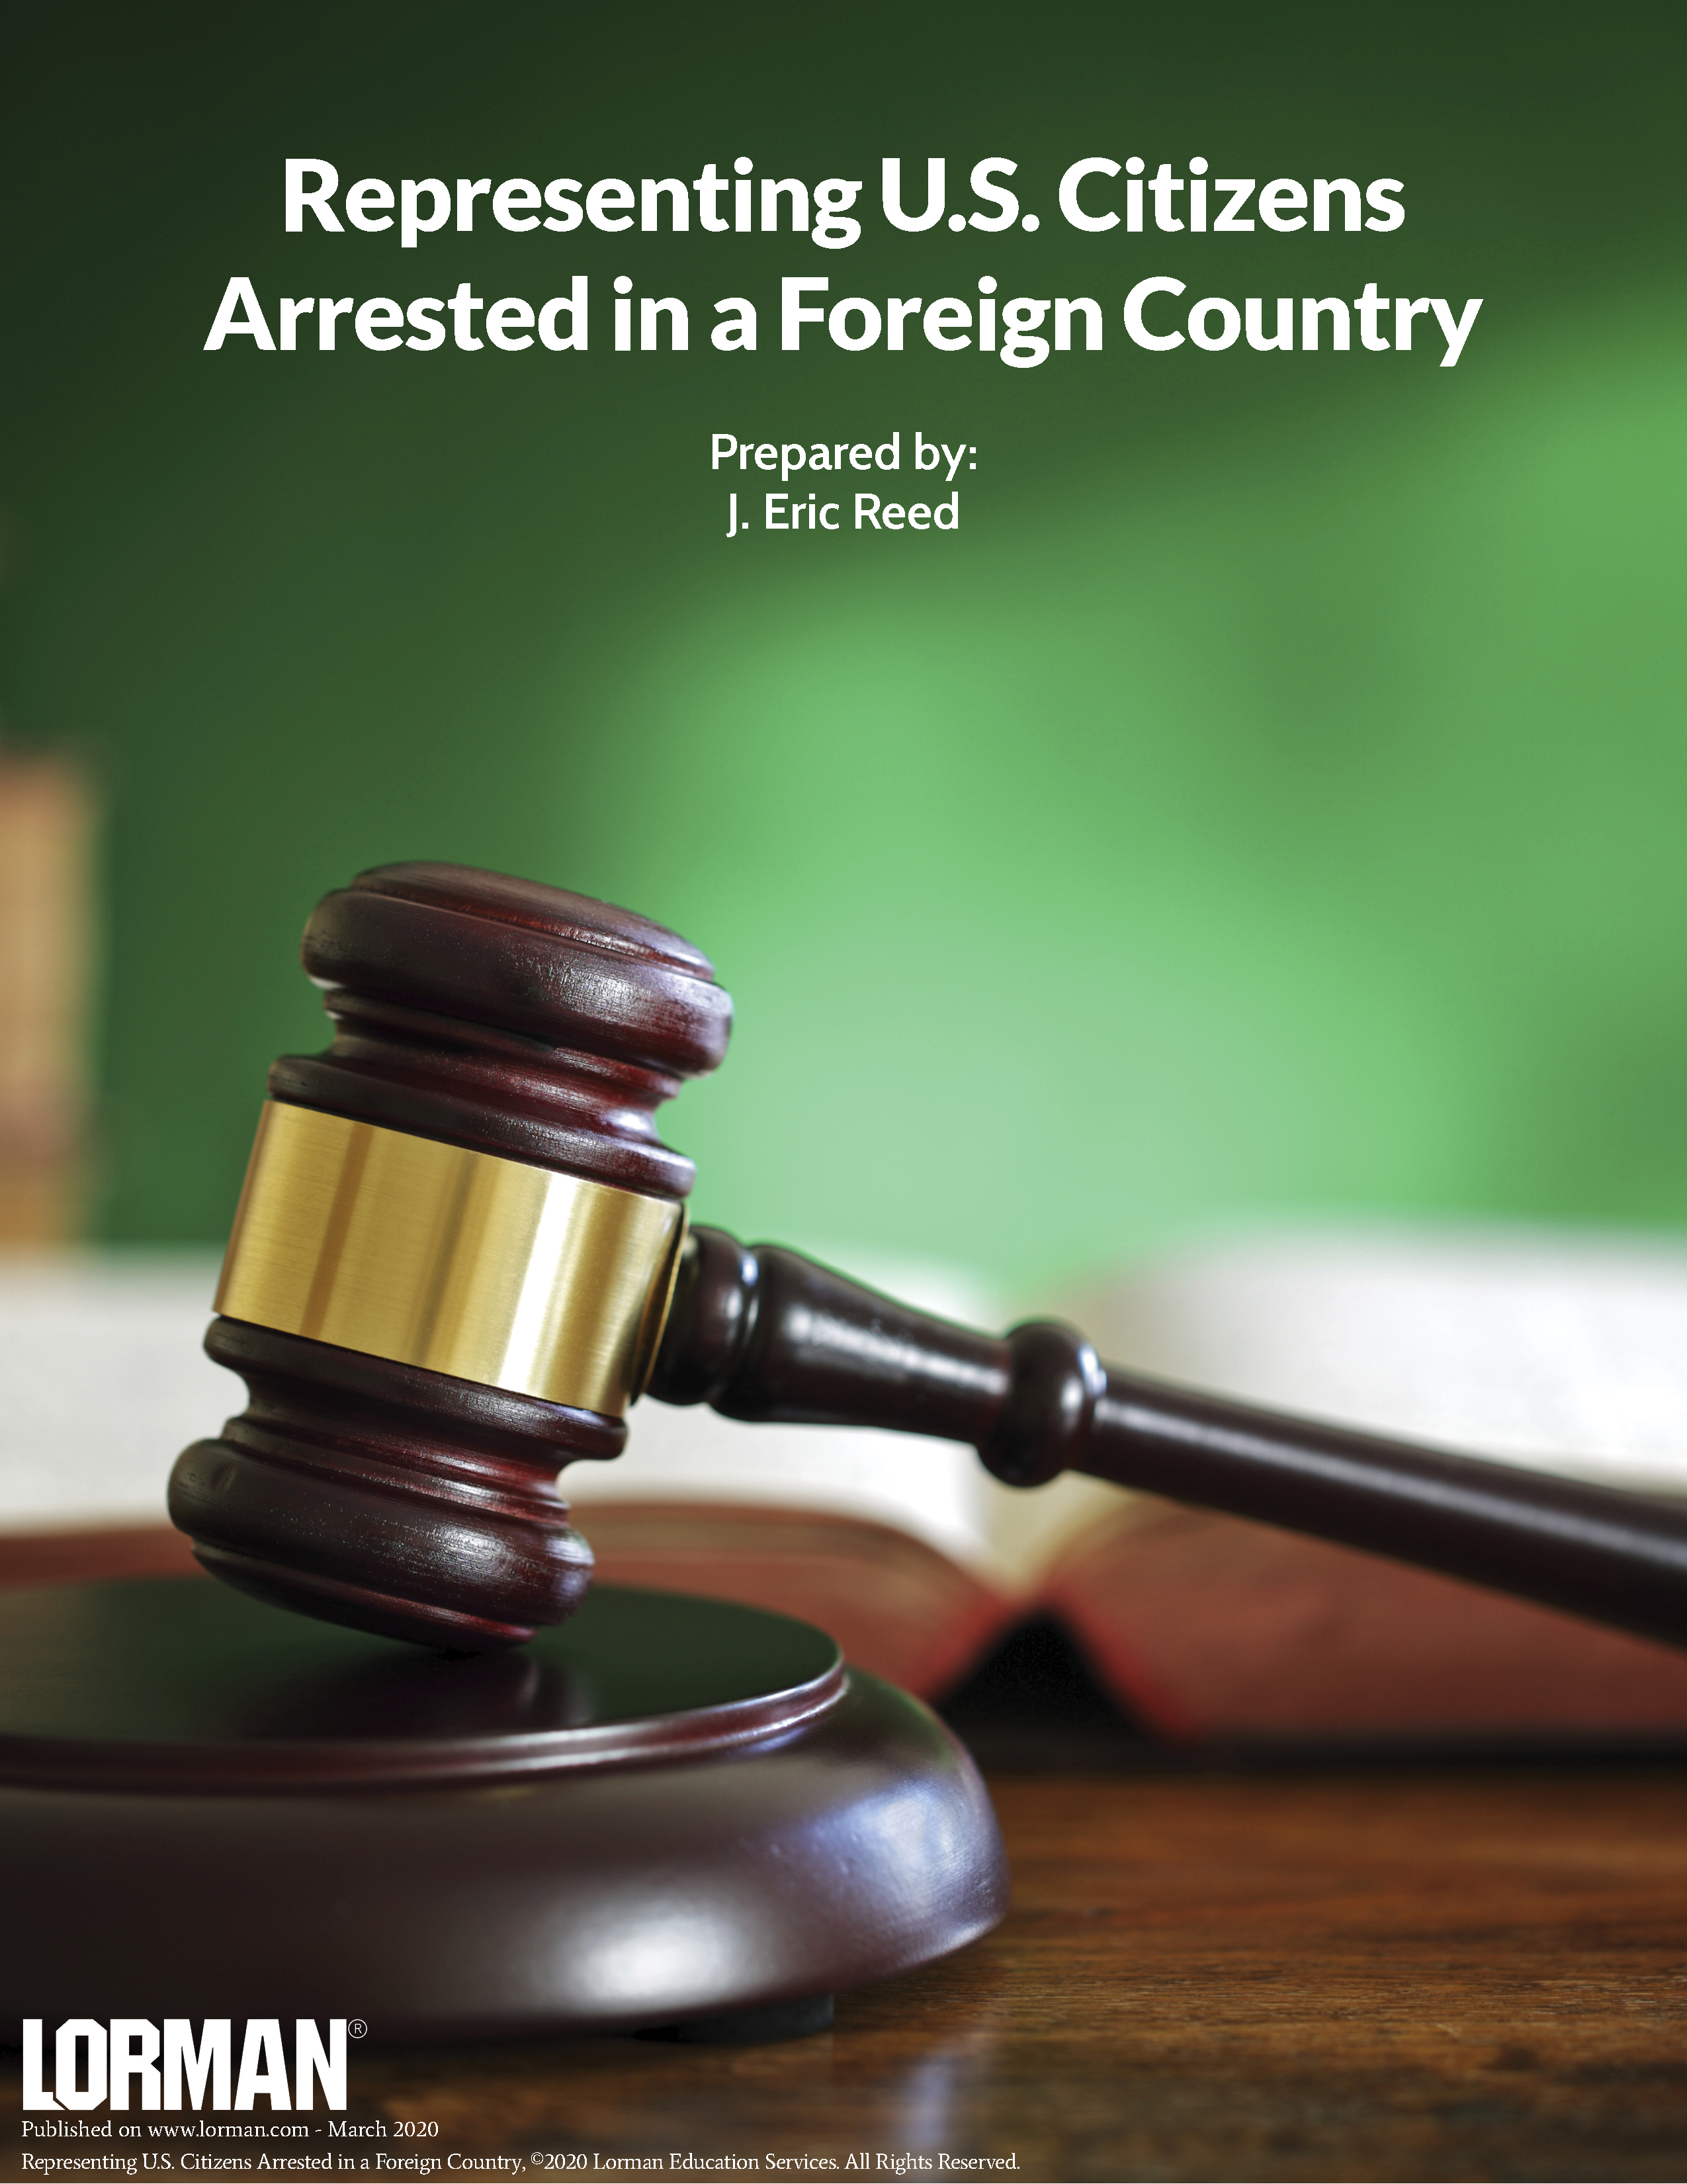 Representing U.S. Citizens Arrested in a Foreign Country